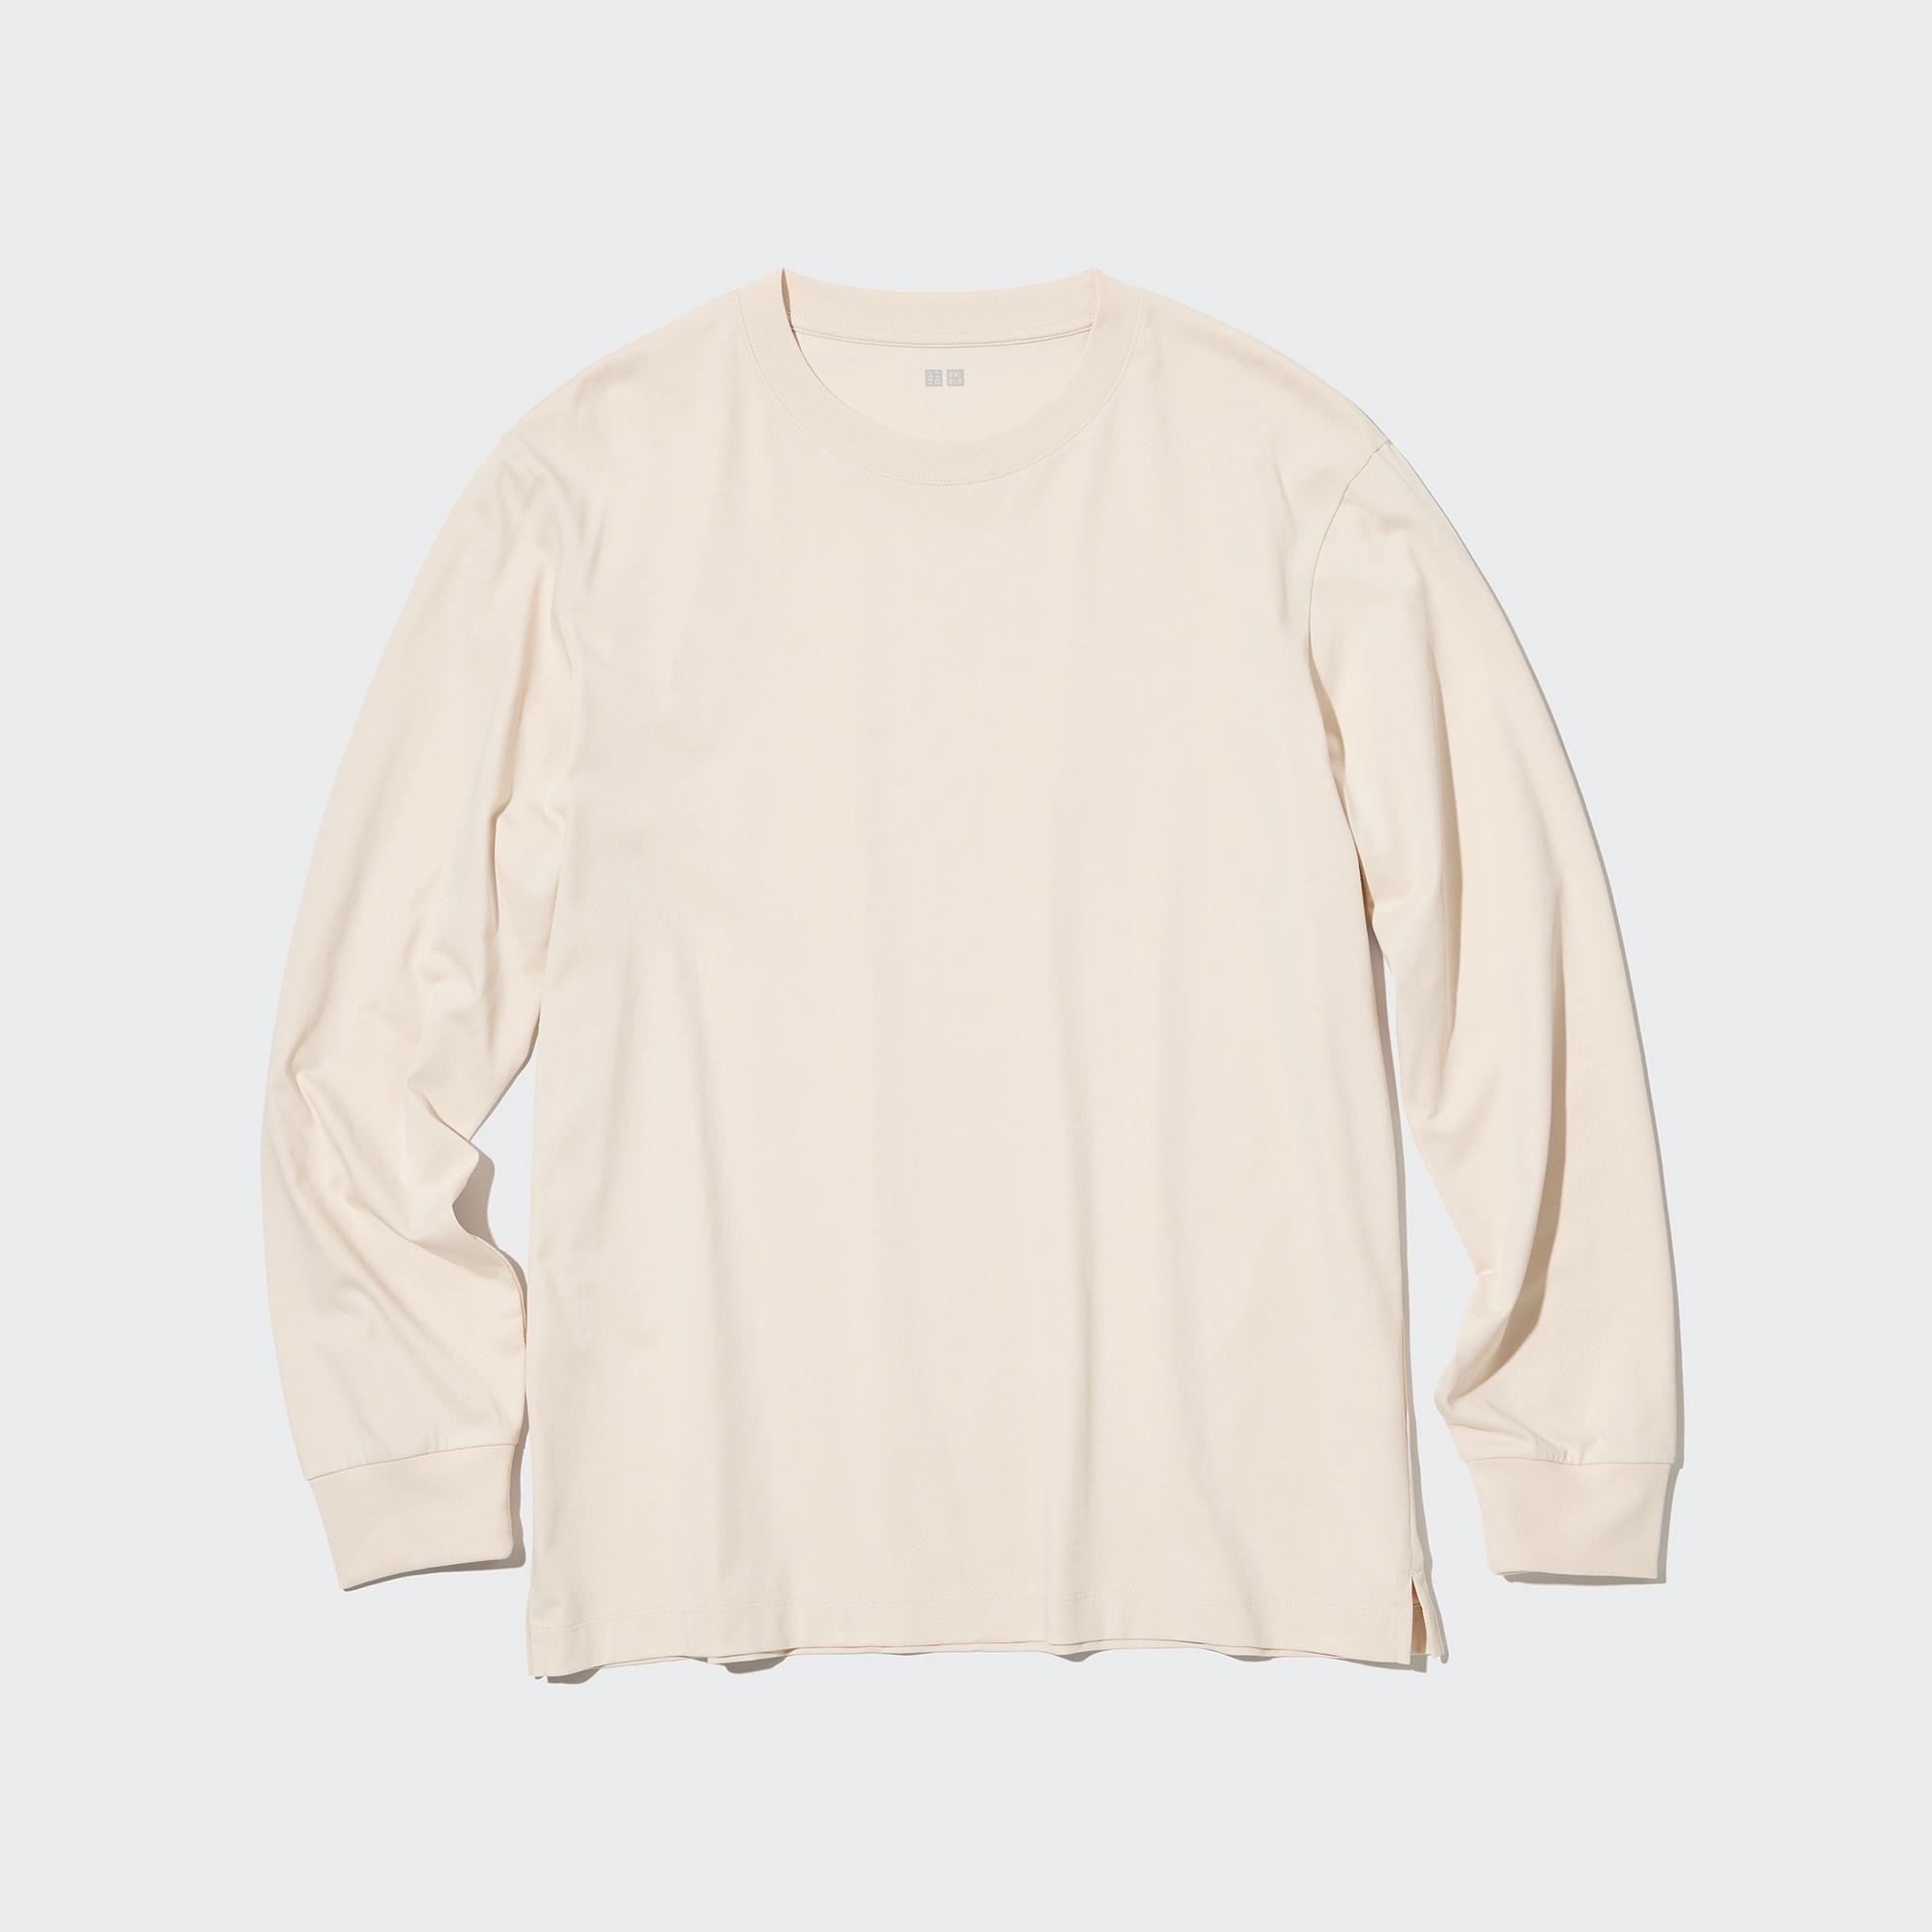 UNIQLO AIRism Cotton UV Protection Crew Neck Long Sleeve T-Shirt